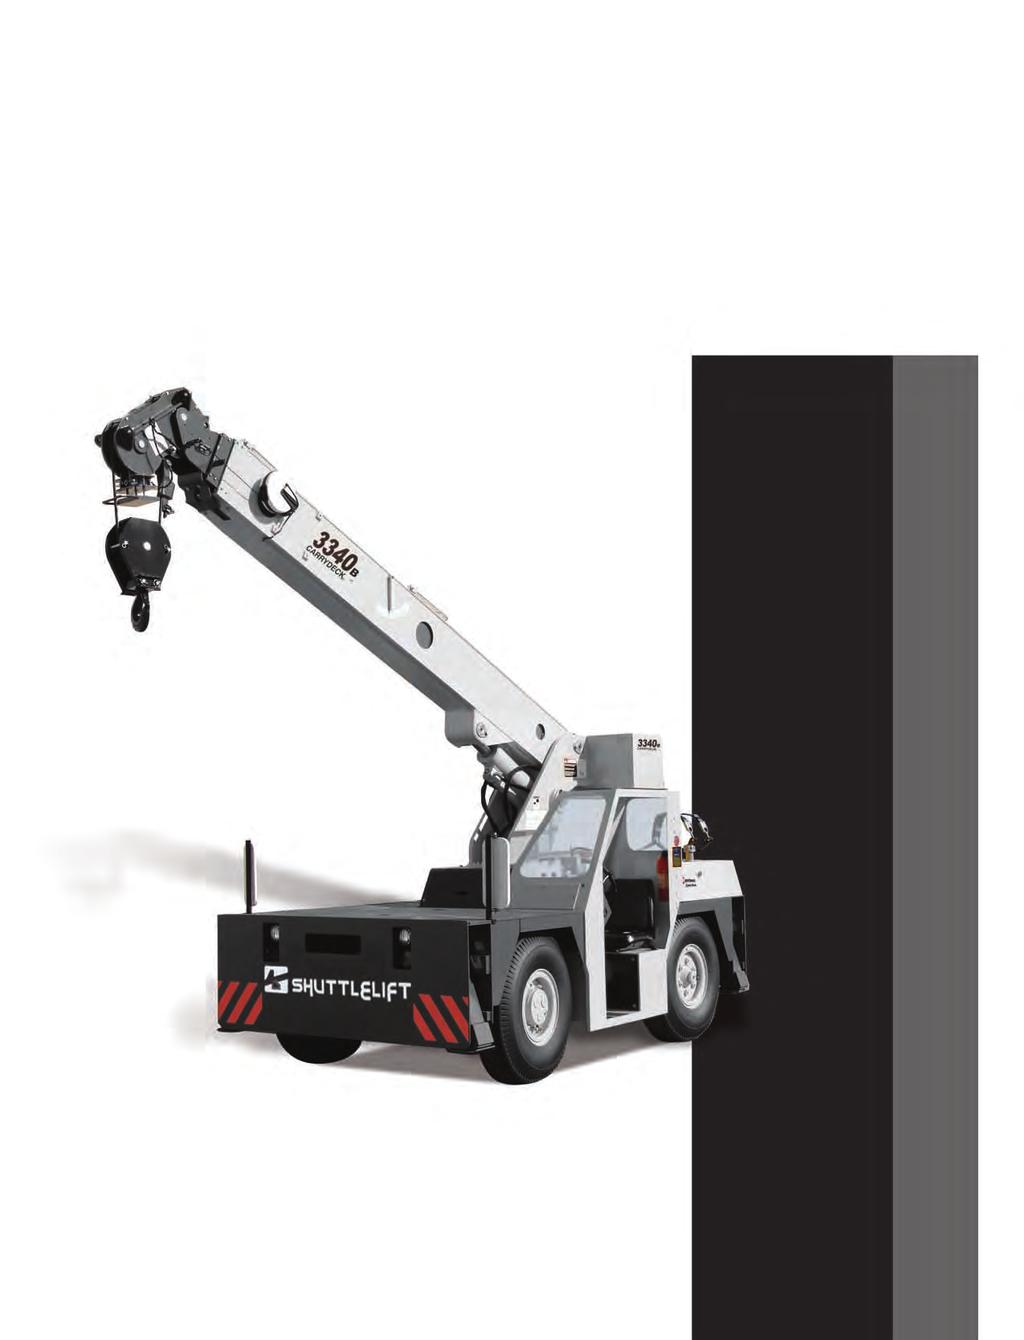 product guide contents Features 2 Specifications 3 features 4 models 333F: 8.5T (7.7mt) 3section boom with 25 ft. 2 in. (7.6m) Tip Height 333FL: 8.5T (7.7mt) 3section boom with 33 ft. 6 in. (1.